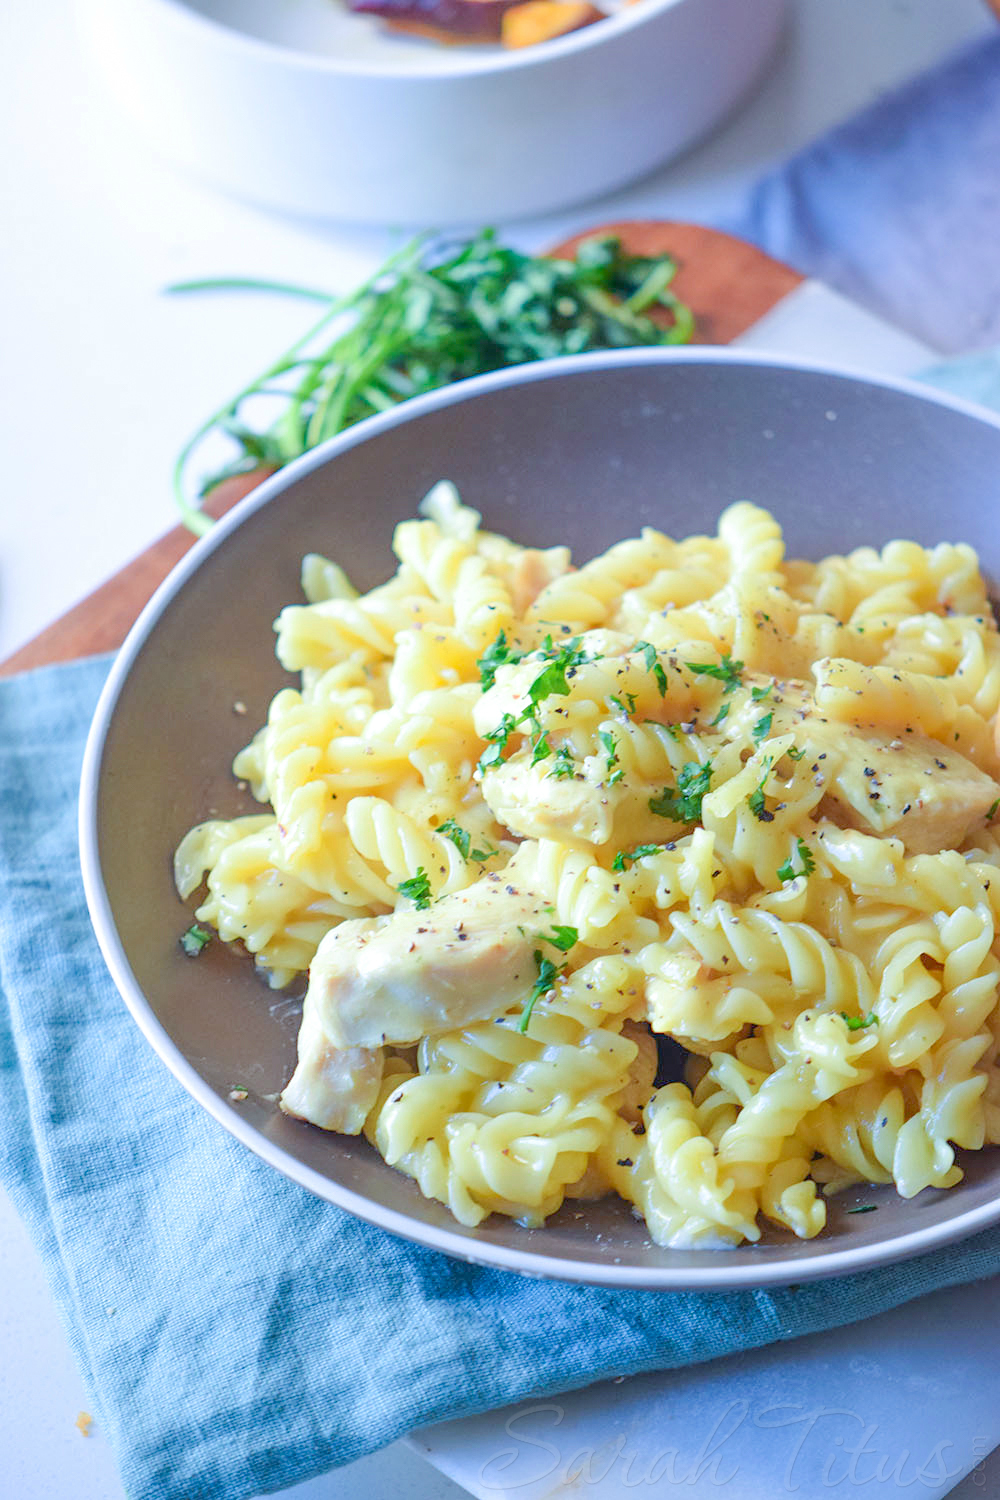 During the week, when we are busy with school and work, quick and easy meals are the way to go! This One Pot Tuscan Chicken Pasta does it all, plus it's less cleanup afterwards!